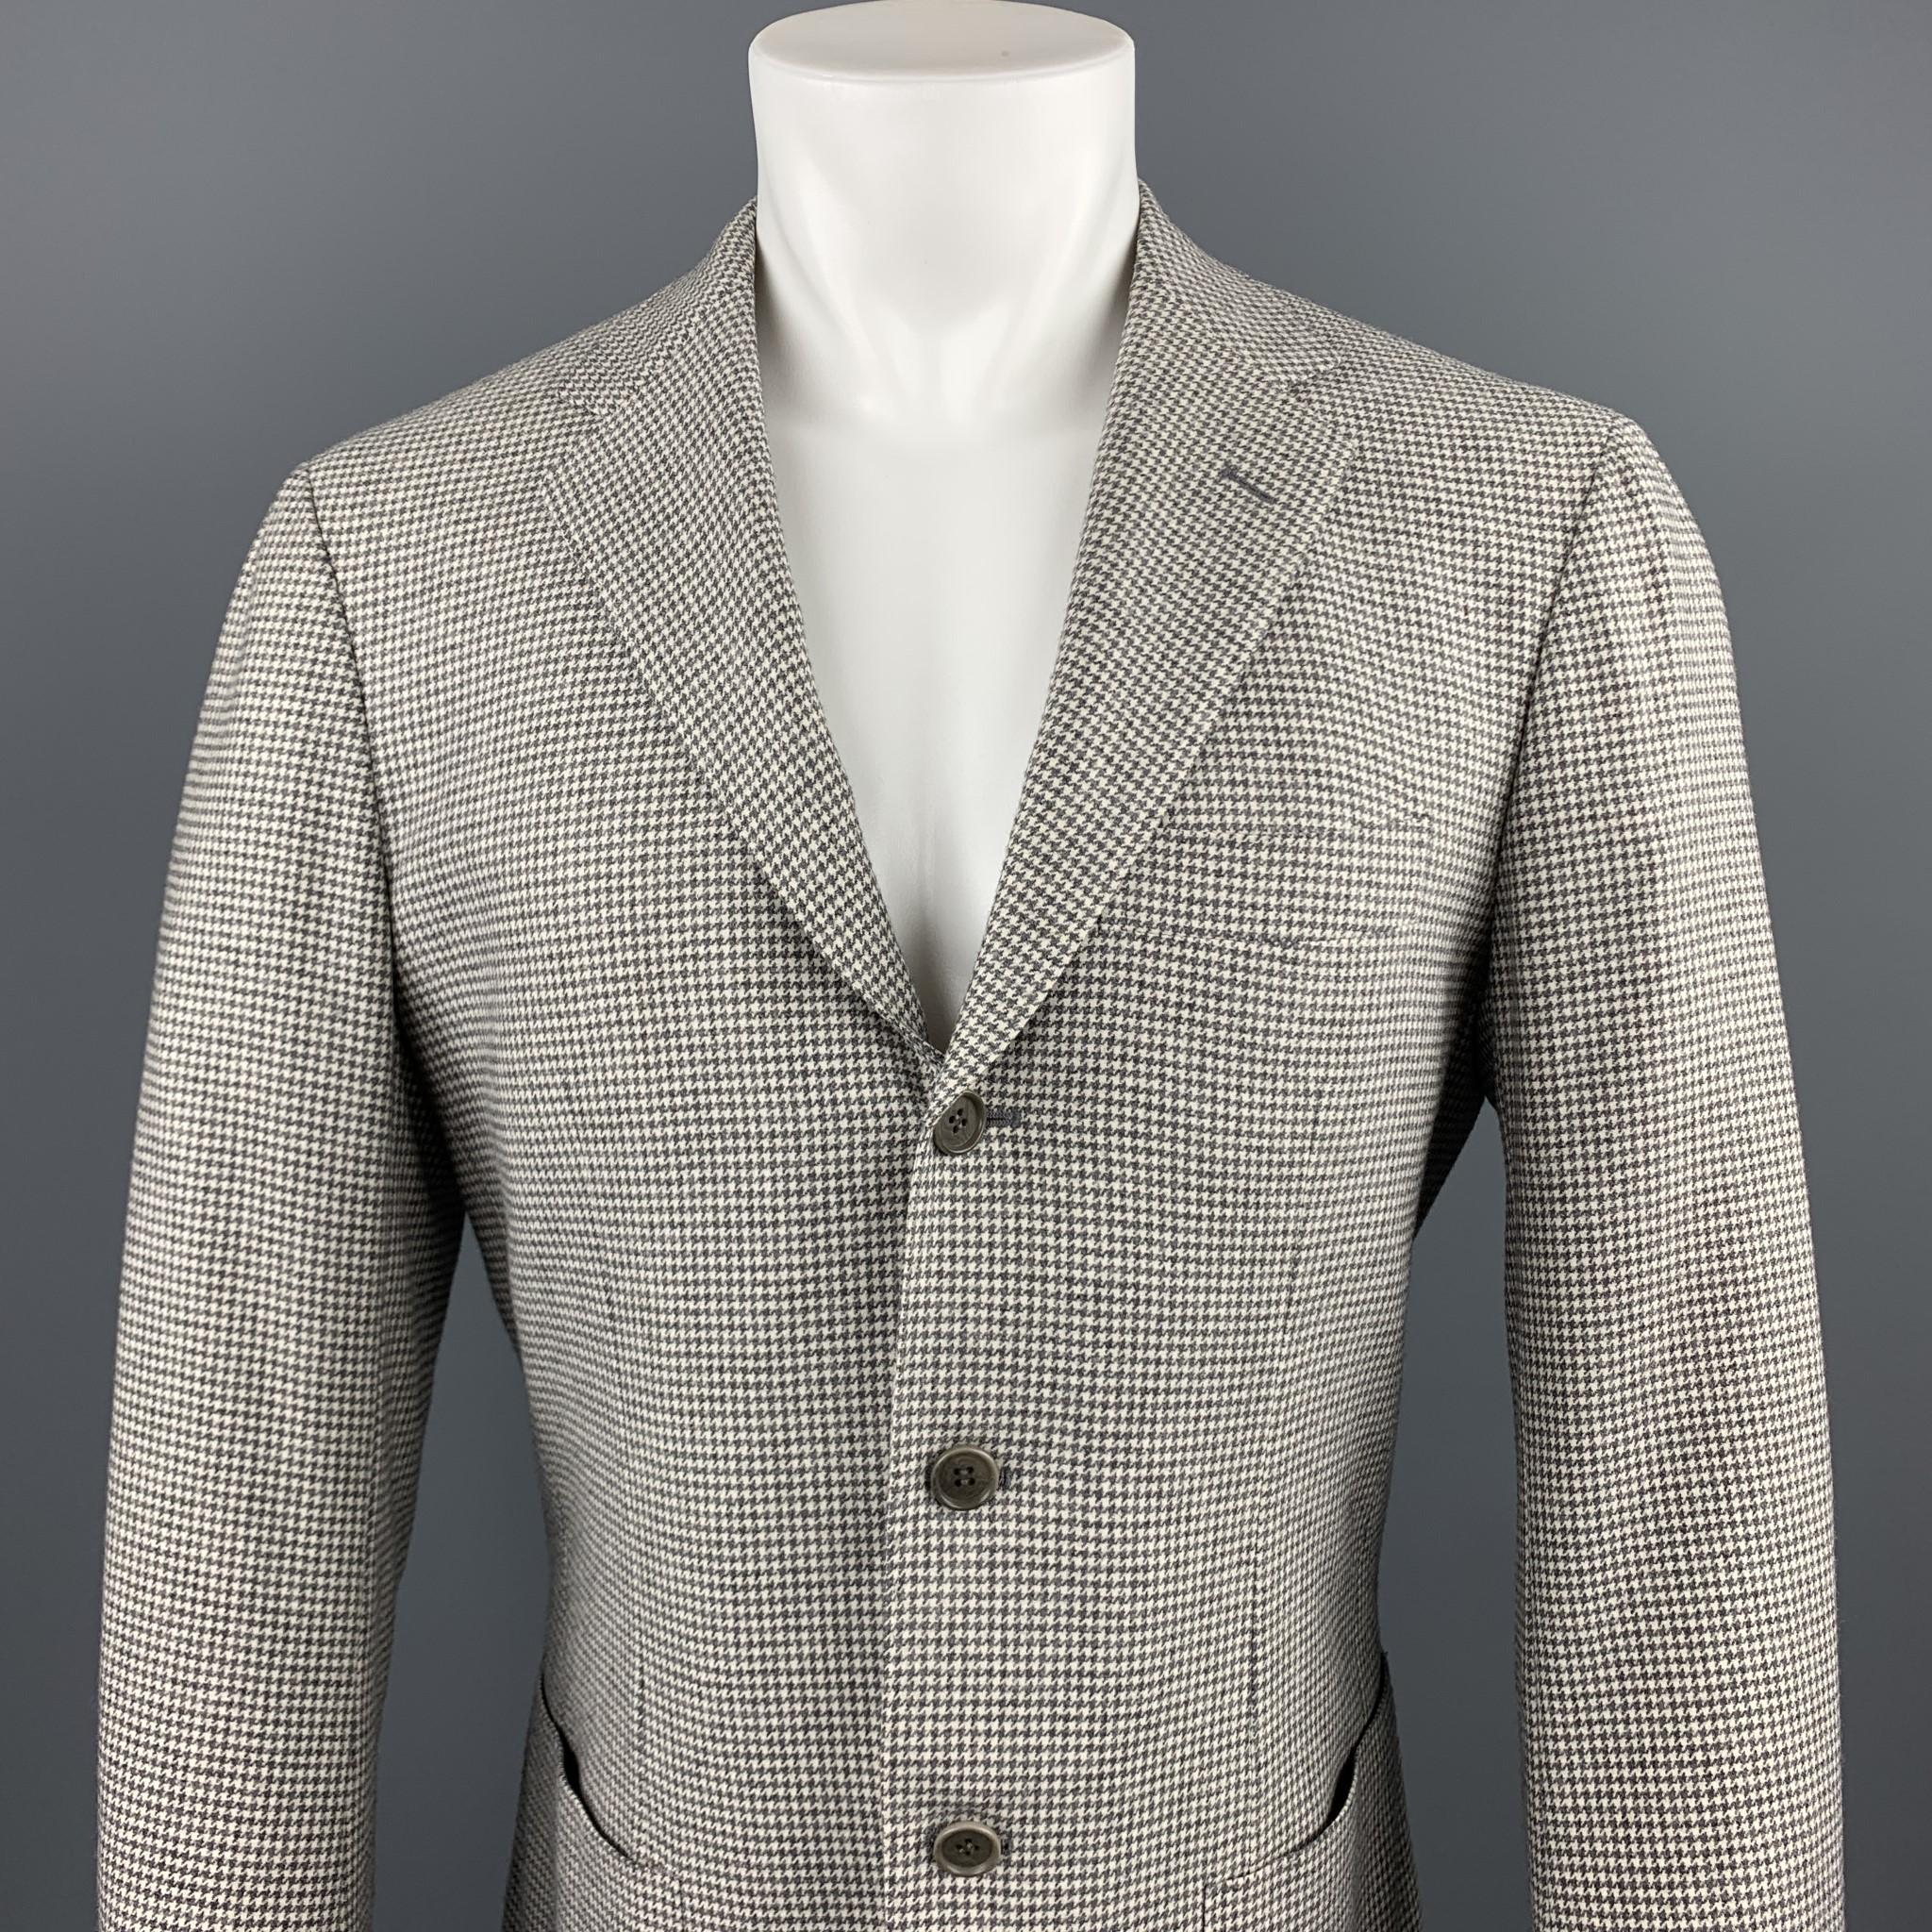 SARTORIO sport coat comes in a gray houndstooth wool / cashmere featuring a notch lapel, patch pockets, and a three button closure. Made in Italy.

Excellent Pre-Owned Condition.
Marked: IT 48

Measurements:

Shoulder: 16 in. 
Chest: 38 in.
Sleeve: